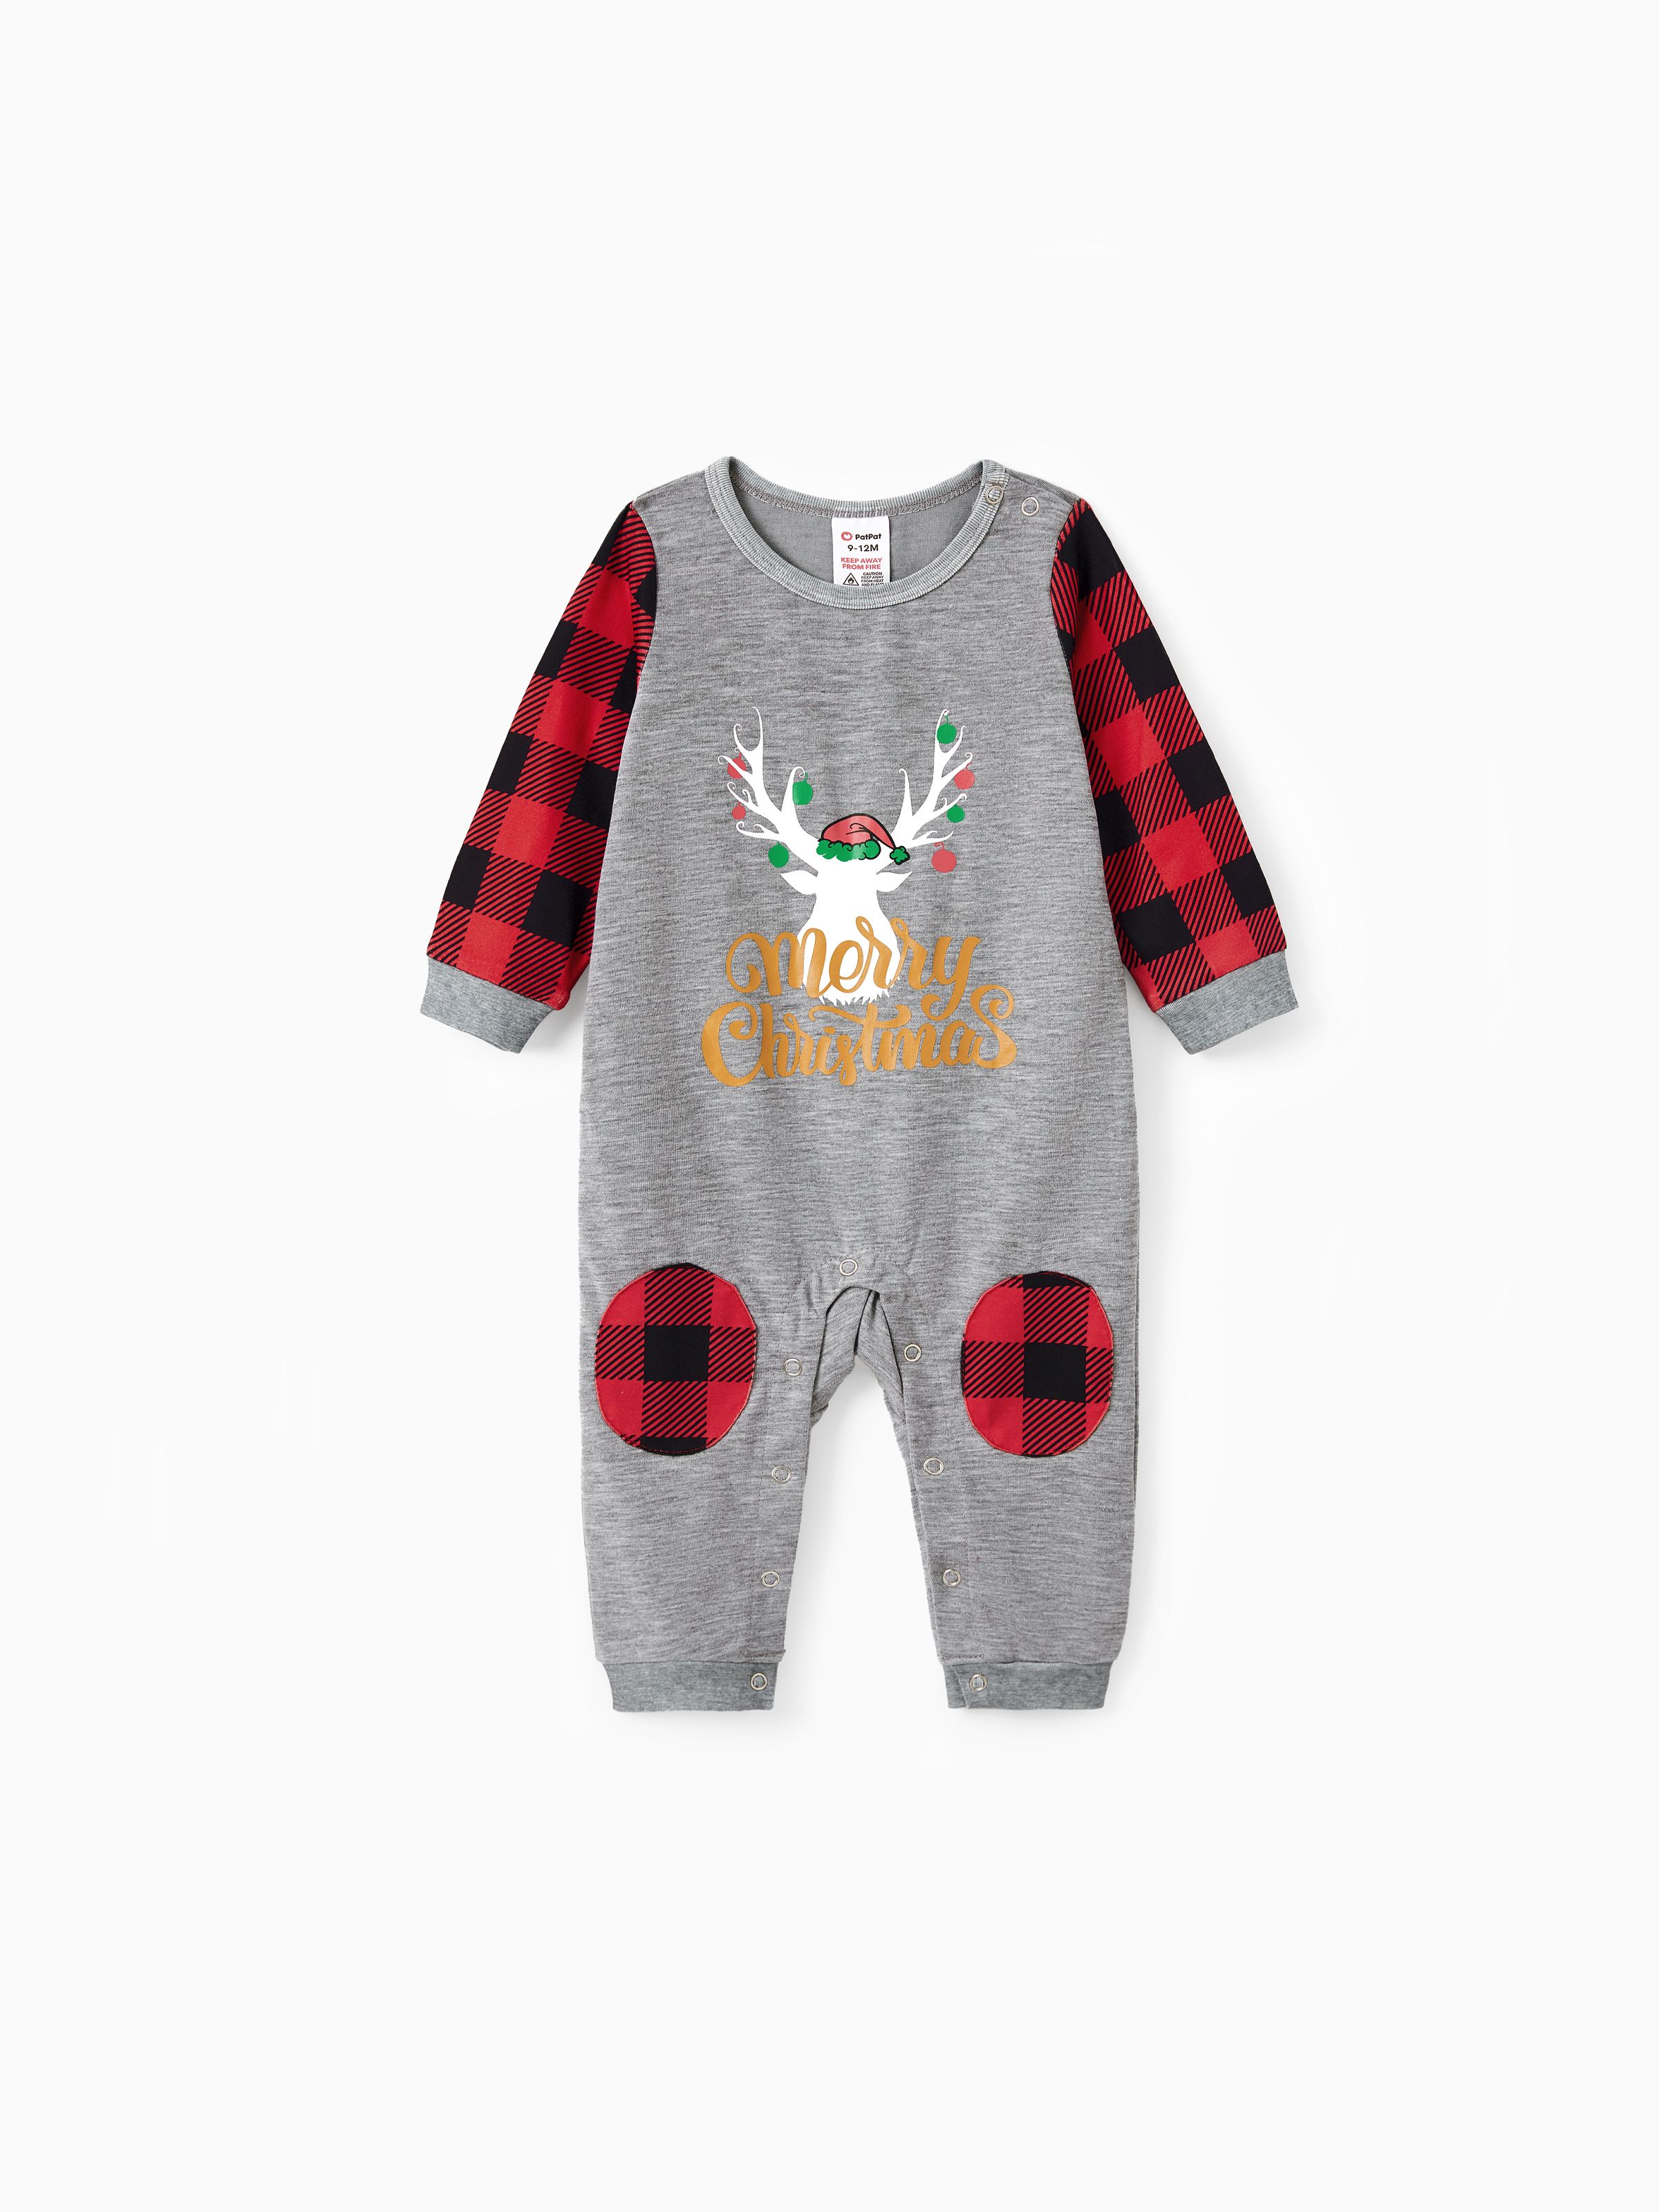 

Merry Christmas Letter Antler Print Plaid Splice Matching Pajamas Sets for Family (Flame Resistant)